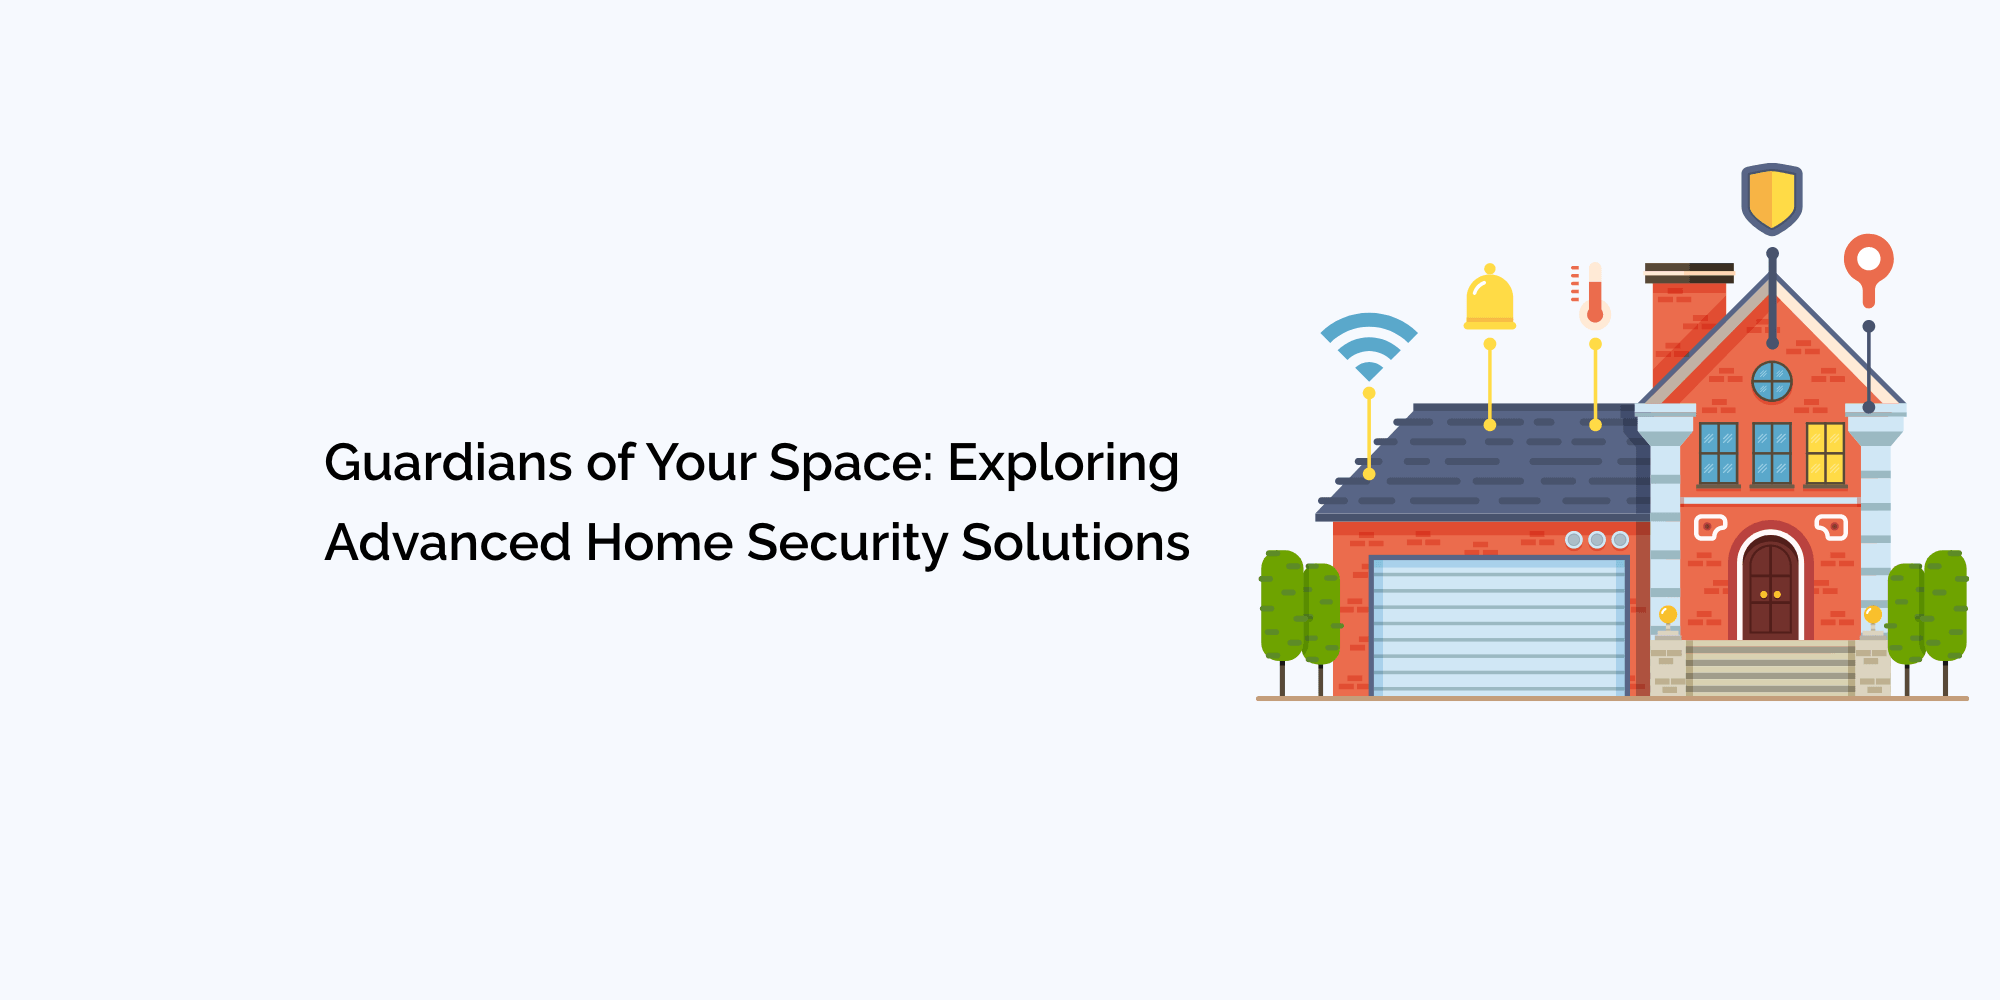 Guardians of Your Space: Exploring Advanced Home Security Solutions